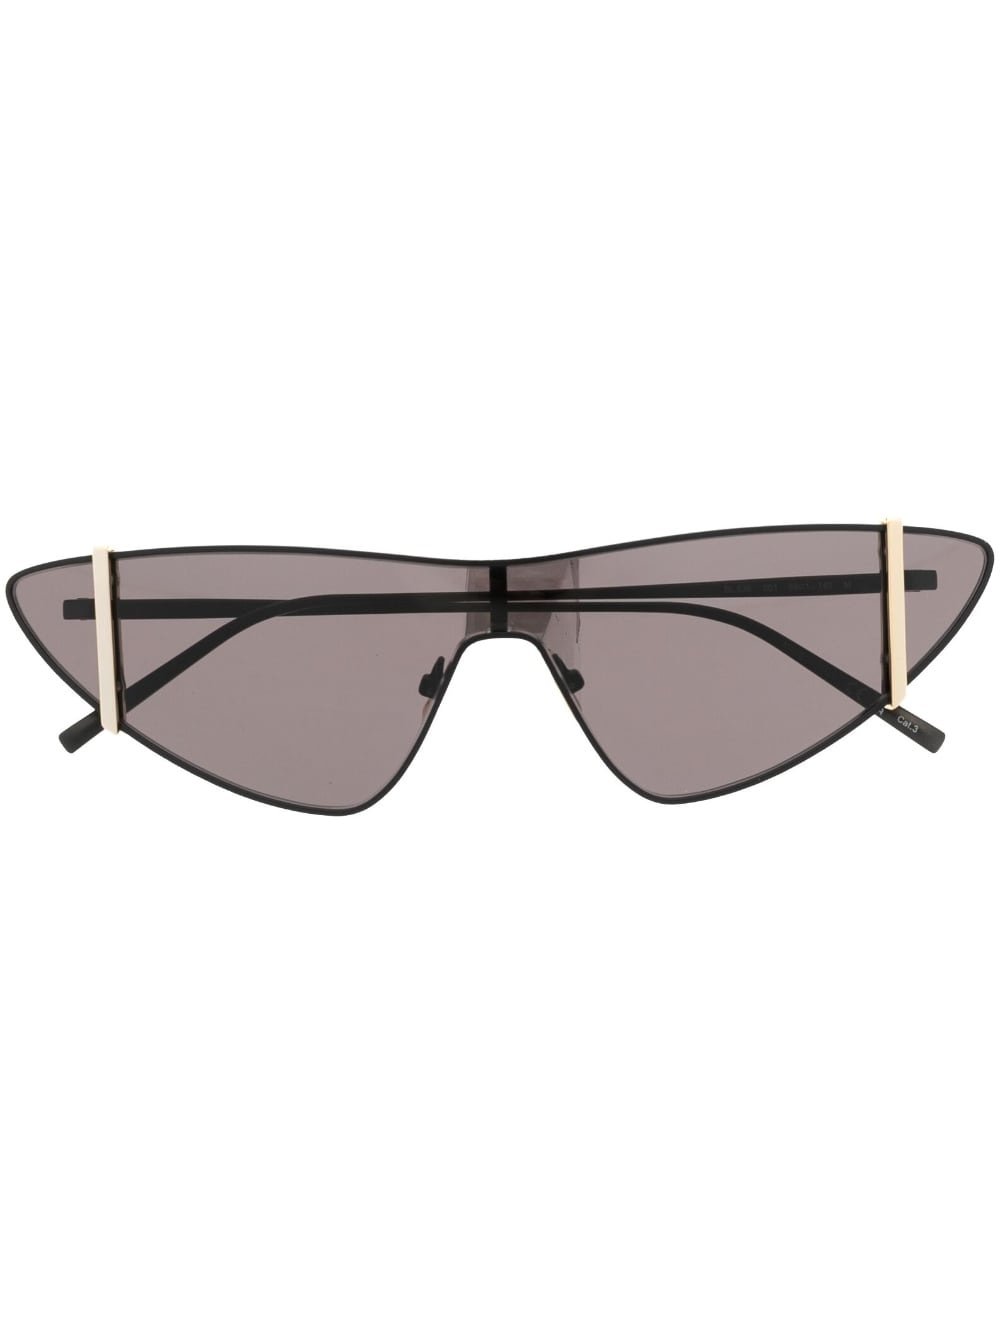 oversize-frame straight-arms sunglasses - 1